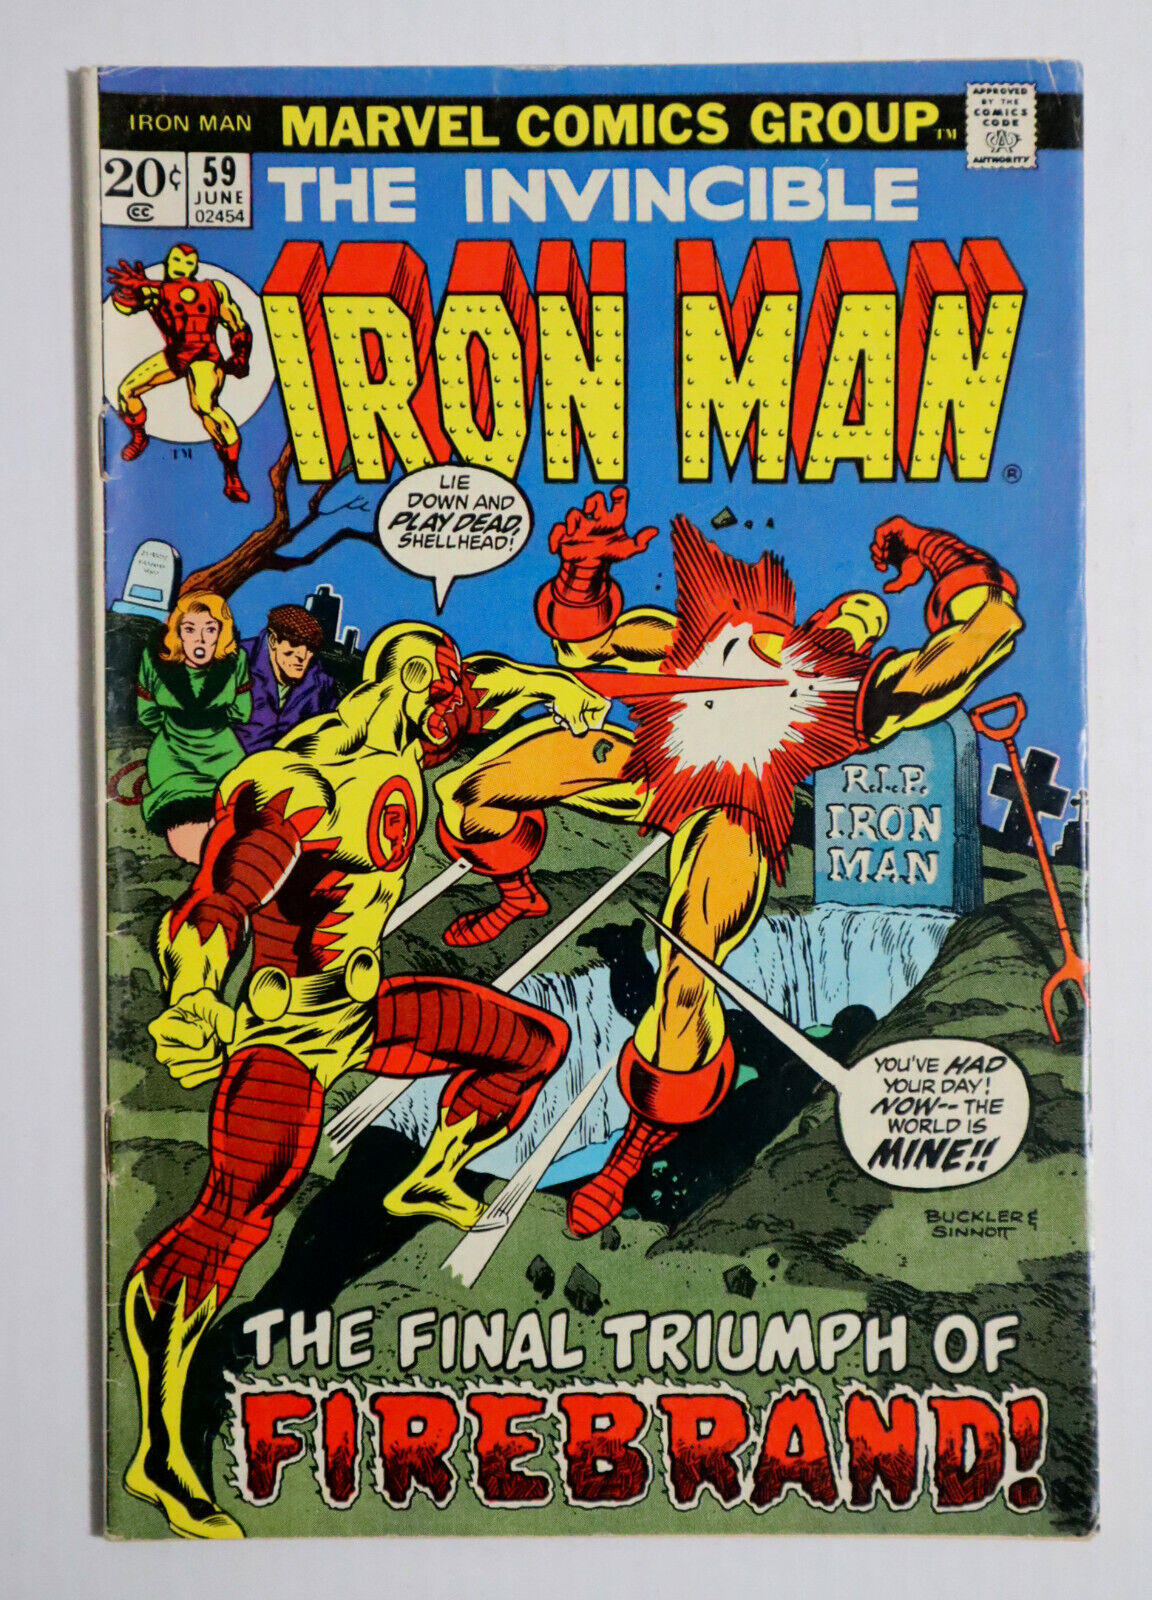 1973 Invincible Iron Man 59 by Marvel Comics 6/73, 1st Series, 20¢ Ironman cover